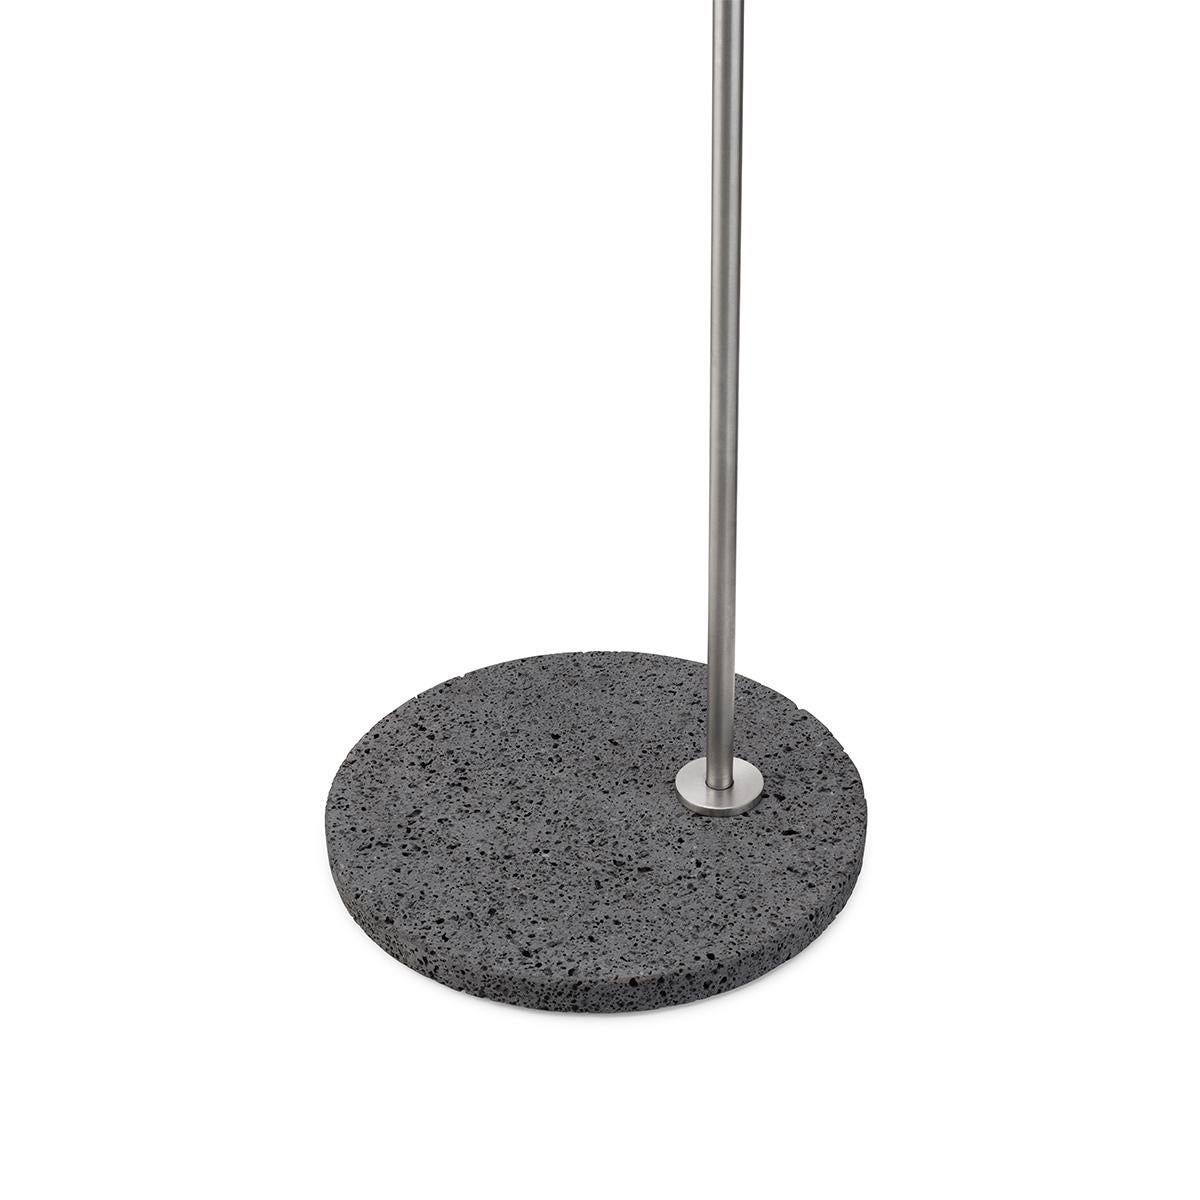 For Sale: Gray (Stainless Steel / Occhio di Pernice Base) FLOS IC Lights F1 Outdoor Floor Lamp by Michael Anastassiades 2